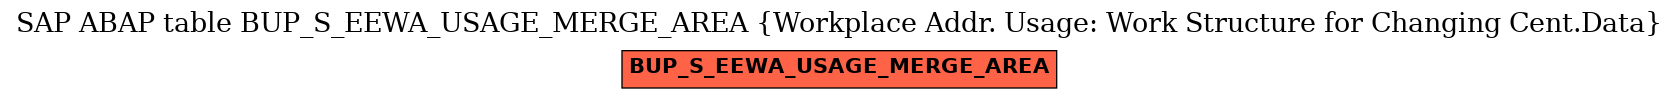 E-R Diagram for table BUP_S_EEWA_USAGE_MERGE_AREA (Workplace Addr. Usage: Work Structure for Changing Cent.Data)